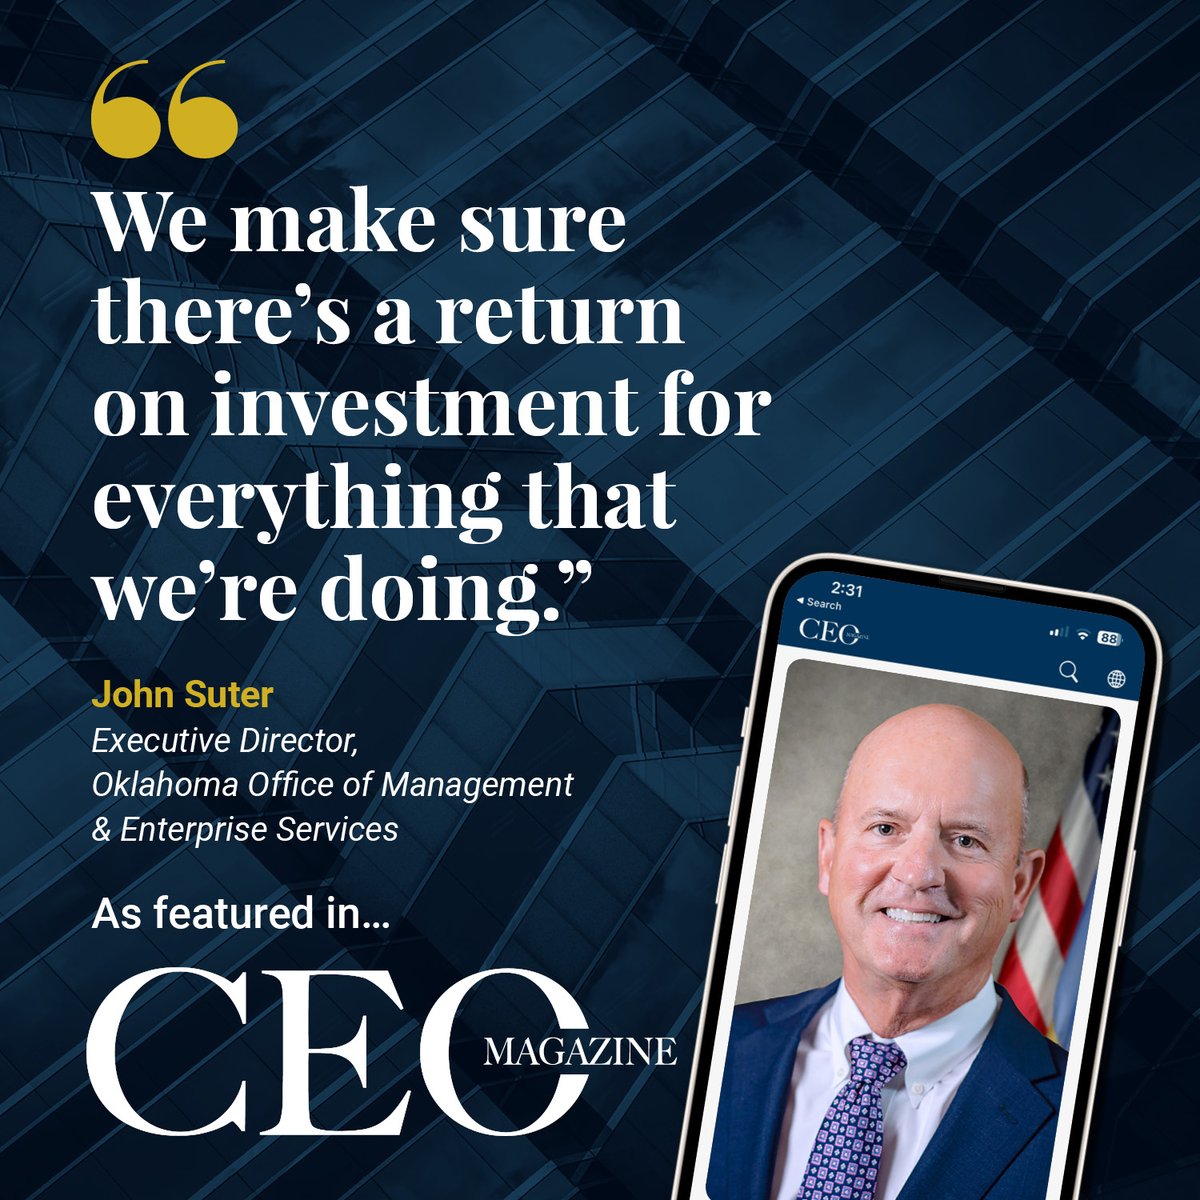 📰📣 @CEOMagazineGL recently sat down with state COO John Suter discuss his role in positioning Oklahoma as a business-friendly state, empowering innovation and efficiency at OMES and using common sense to #GetStuffDone.

🔗 Read the article: digitalmag.theceomagazine.com/john-suter/

@Celonis